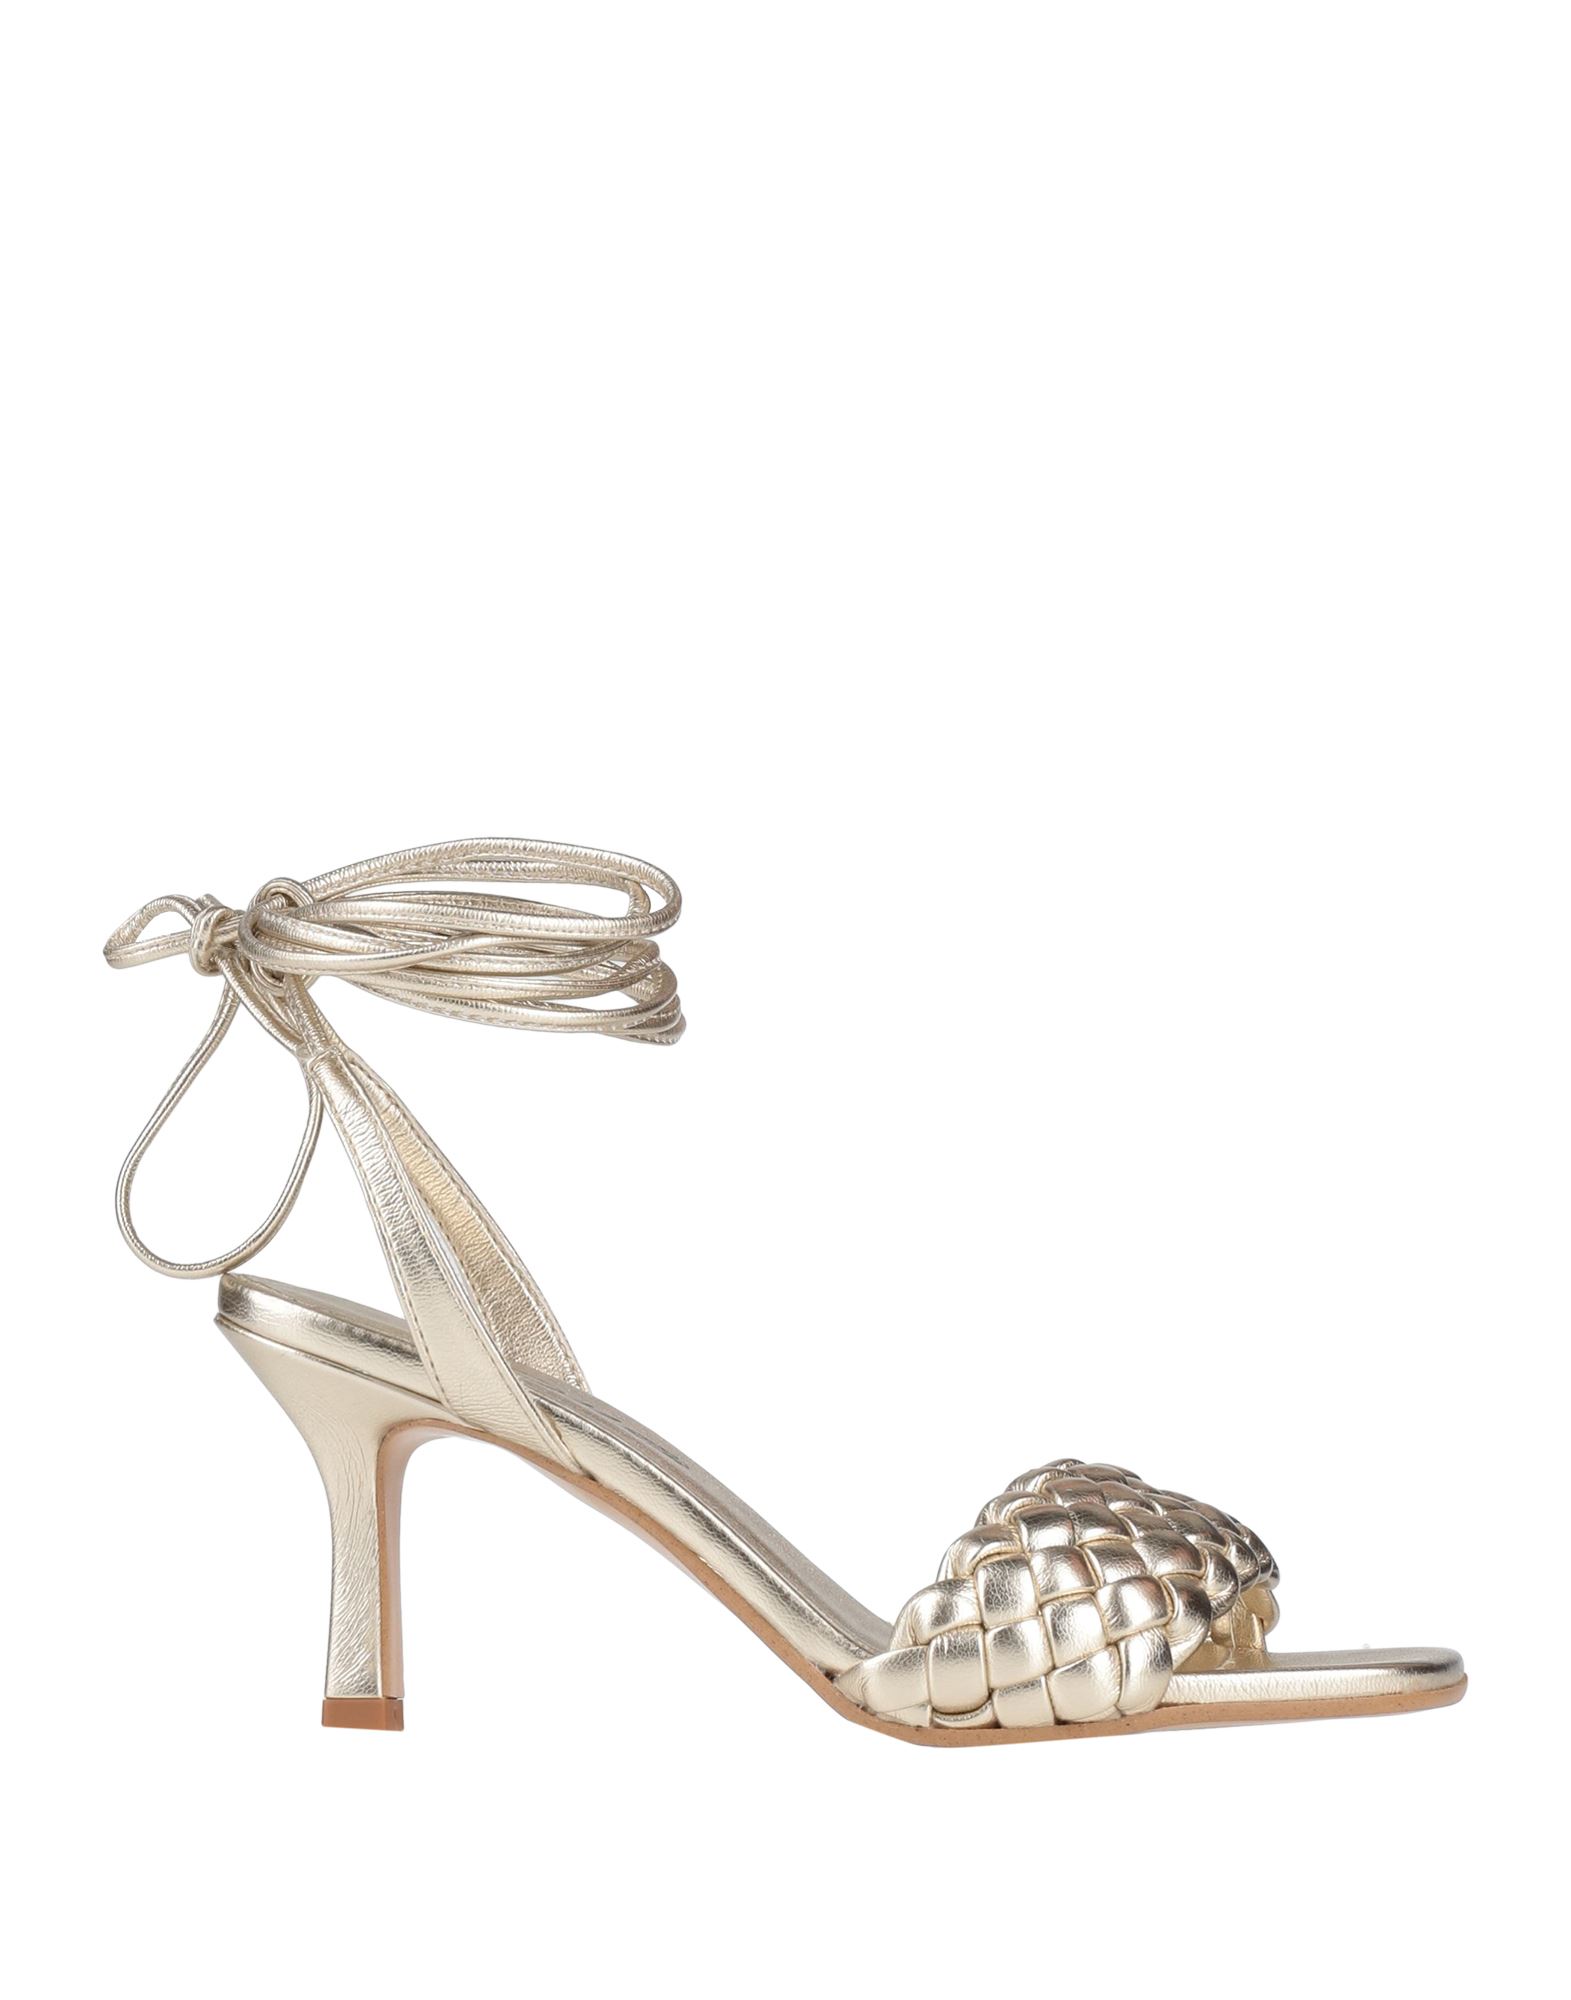 Paolo Mattei Sandals In Grey